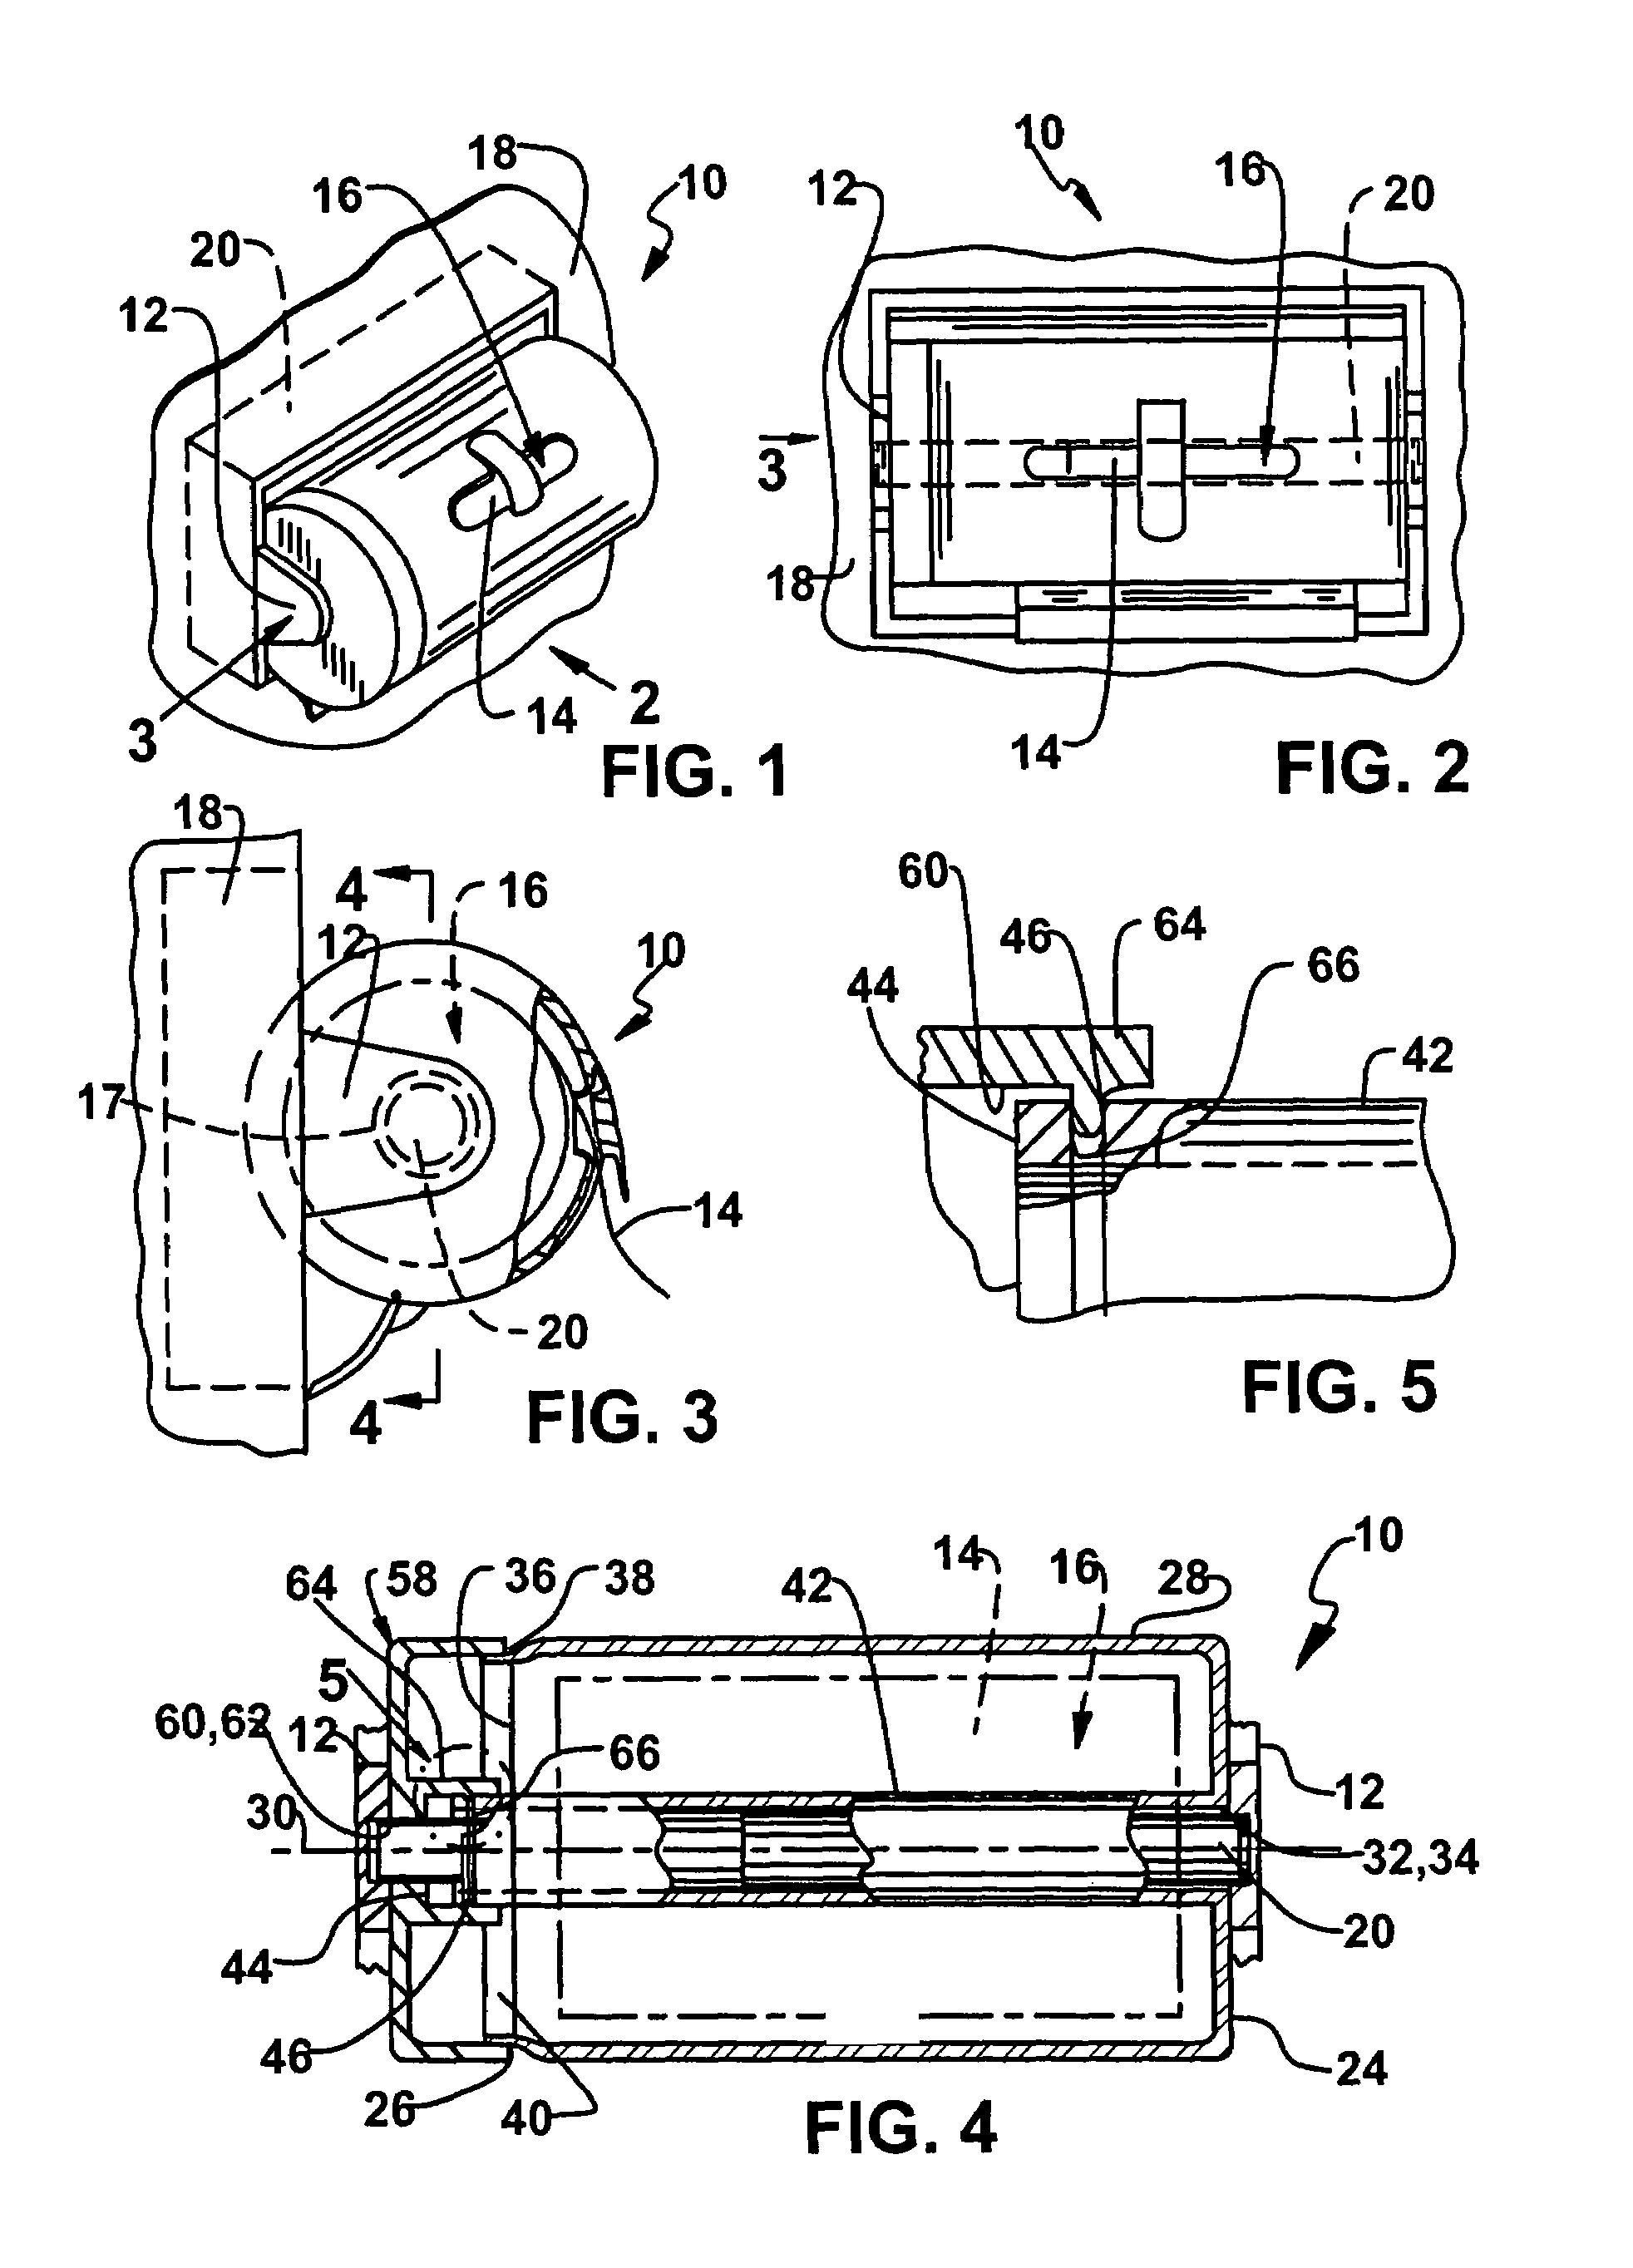 Dispenser for readily attaching to a role-type toilet-tissue holder and dispensing moist towelettes from a role